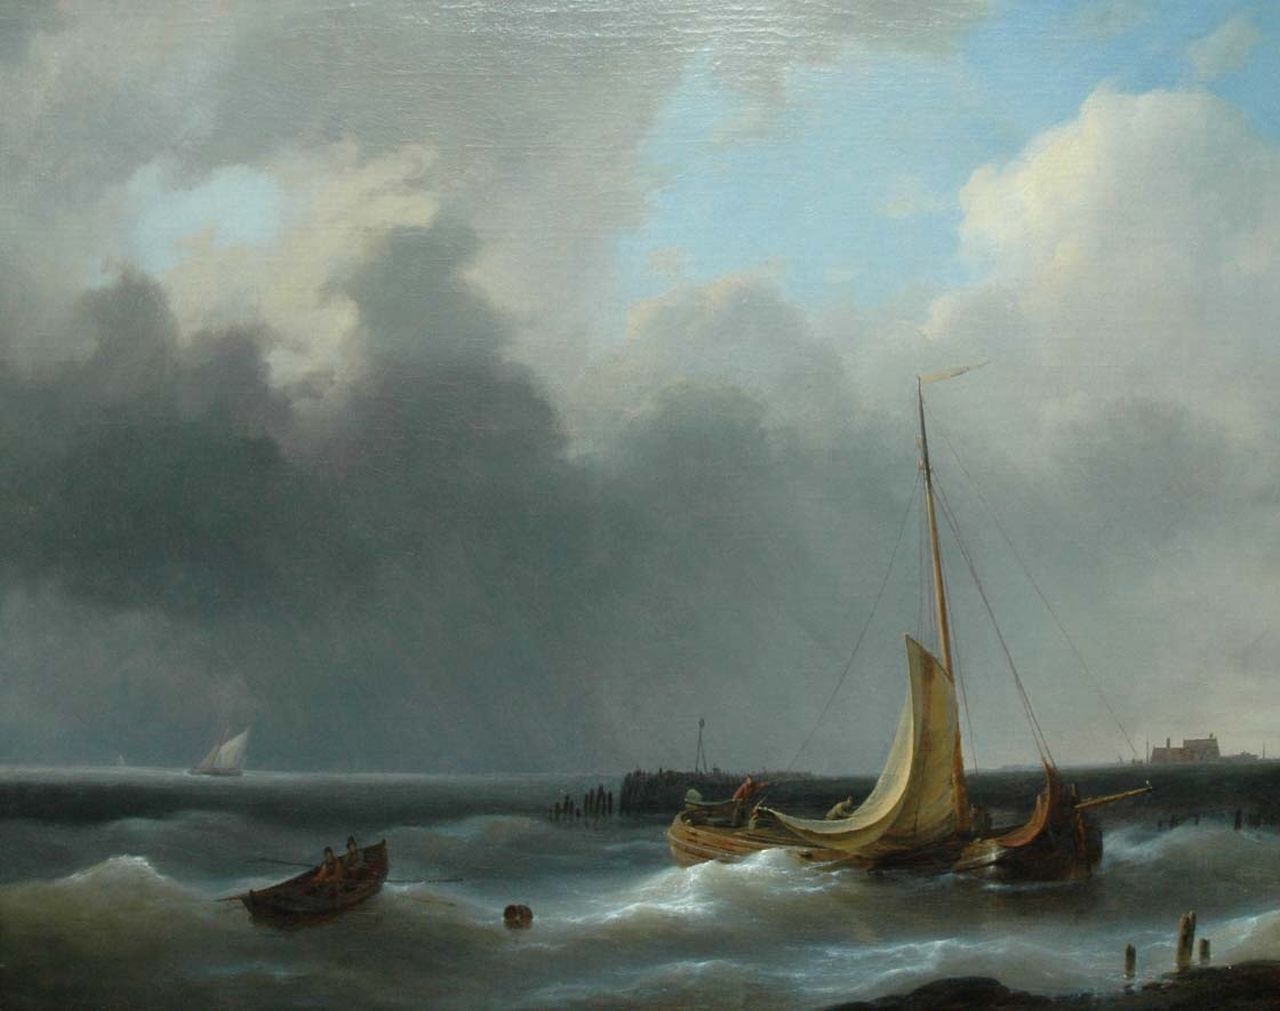 Hulk A.  | Abraham Hulk, Returning to the harbour in a storm, oil on canvas 48.3 x 60.3 cm, signed l.r.